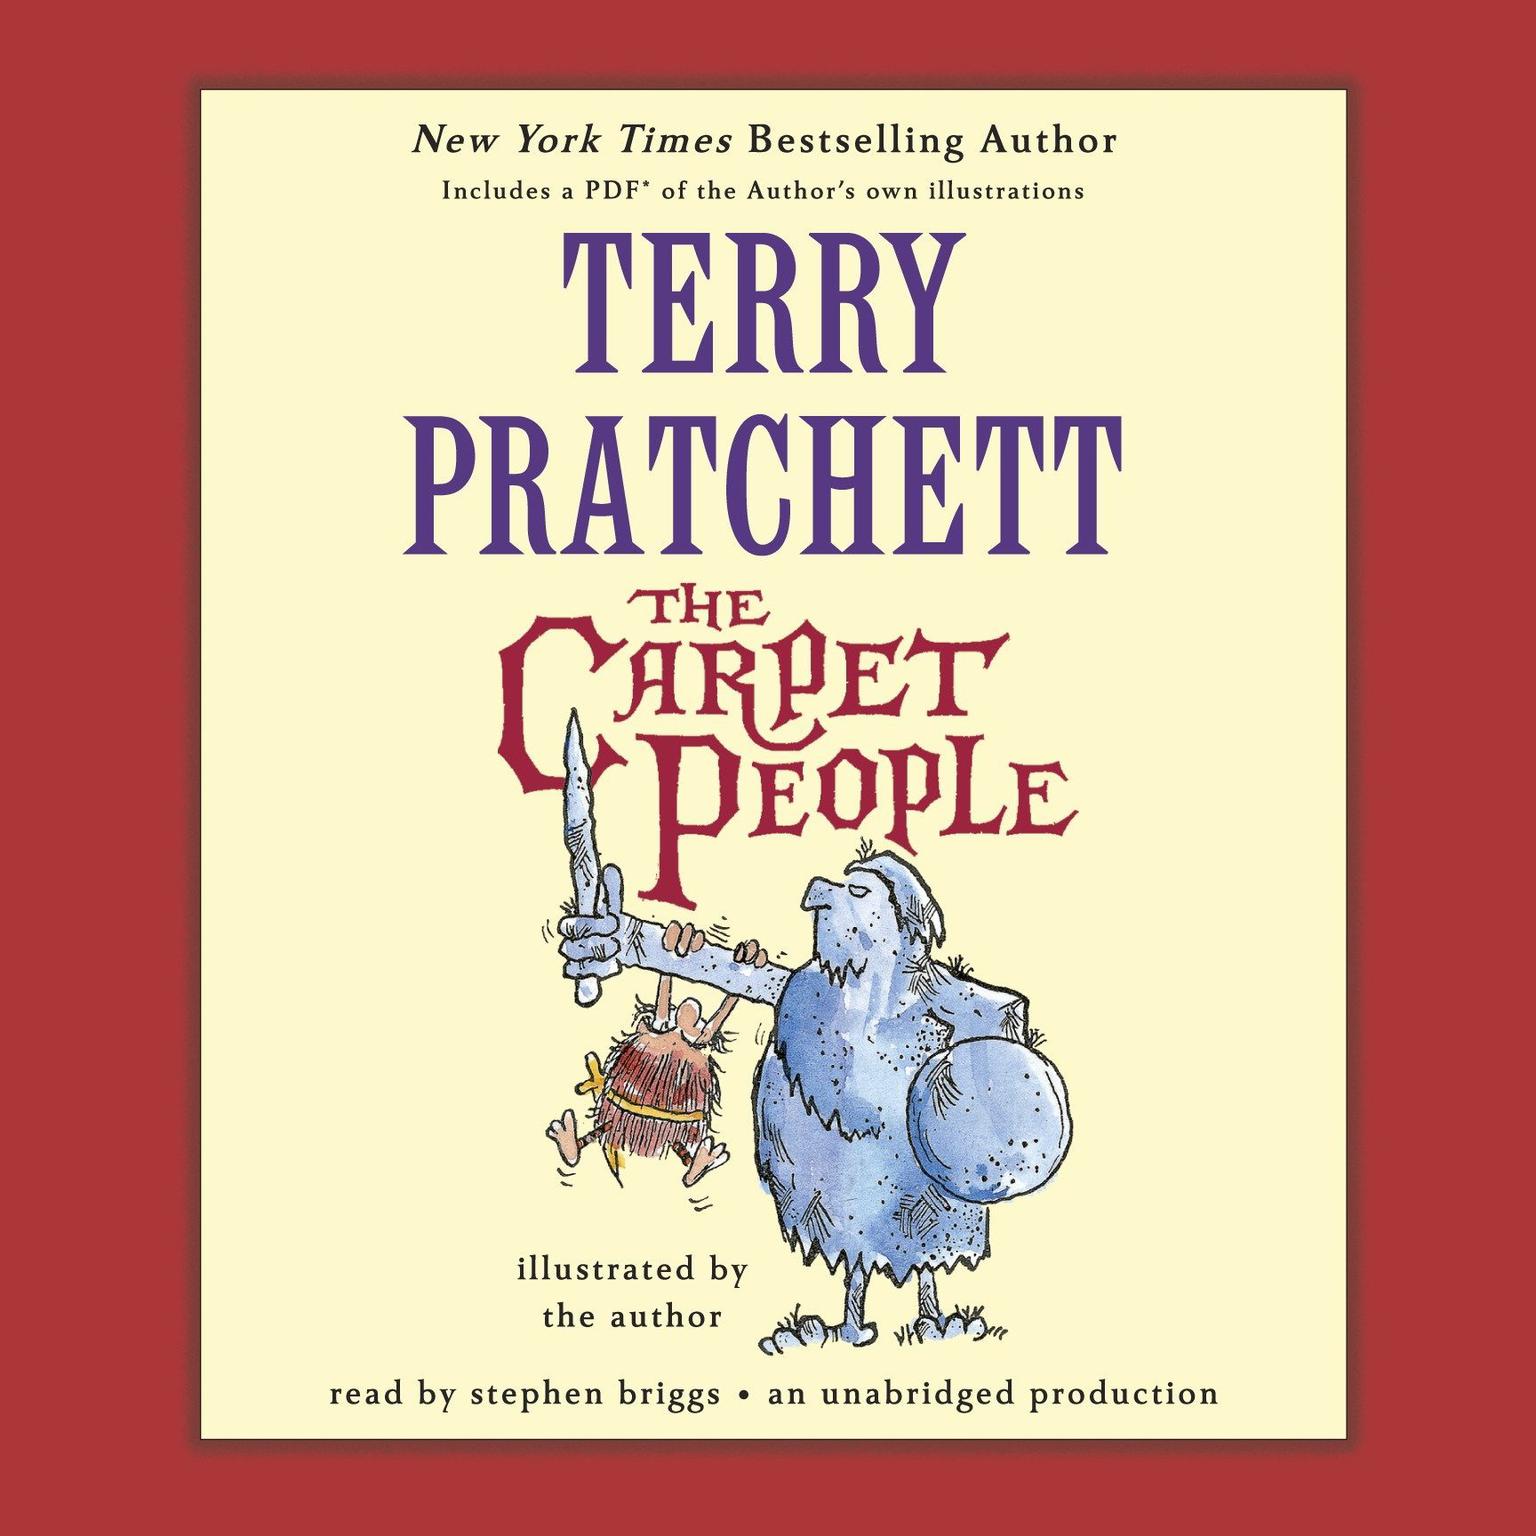 The Carpet People Audiobook, by Terry Pratchett